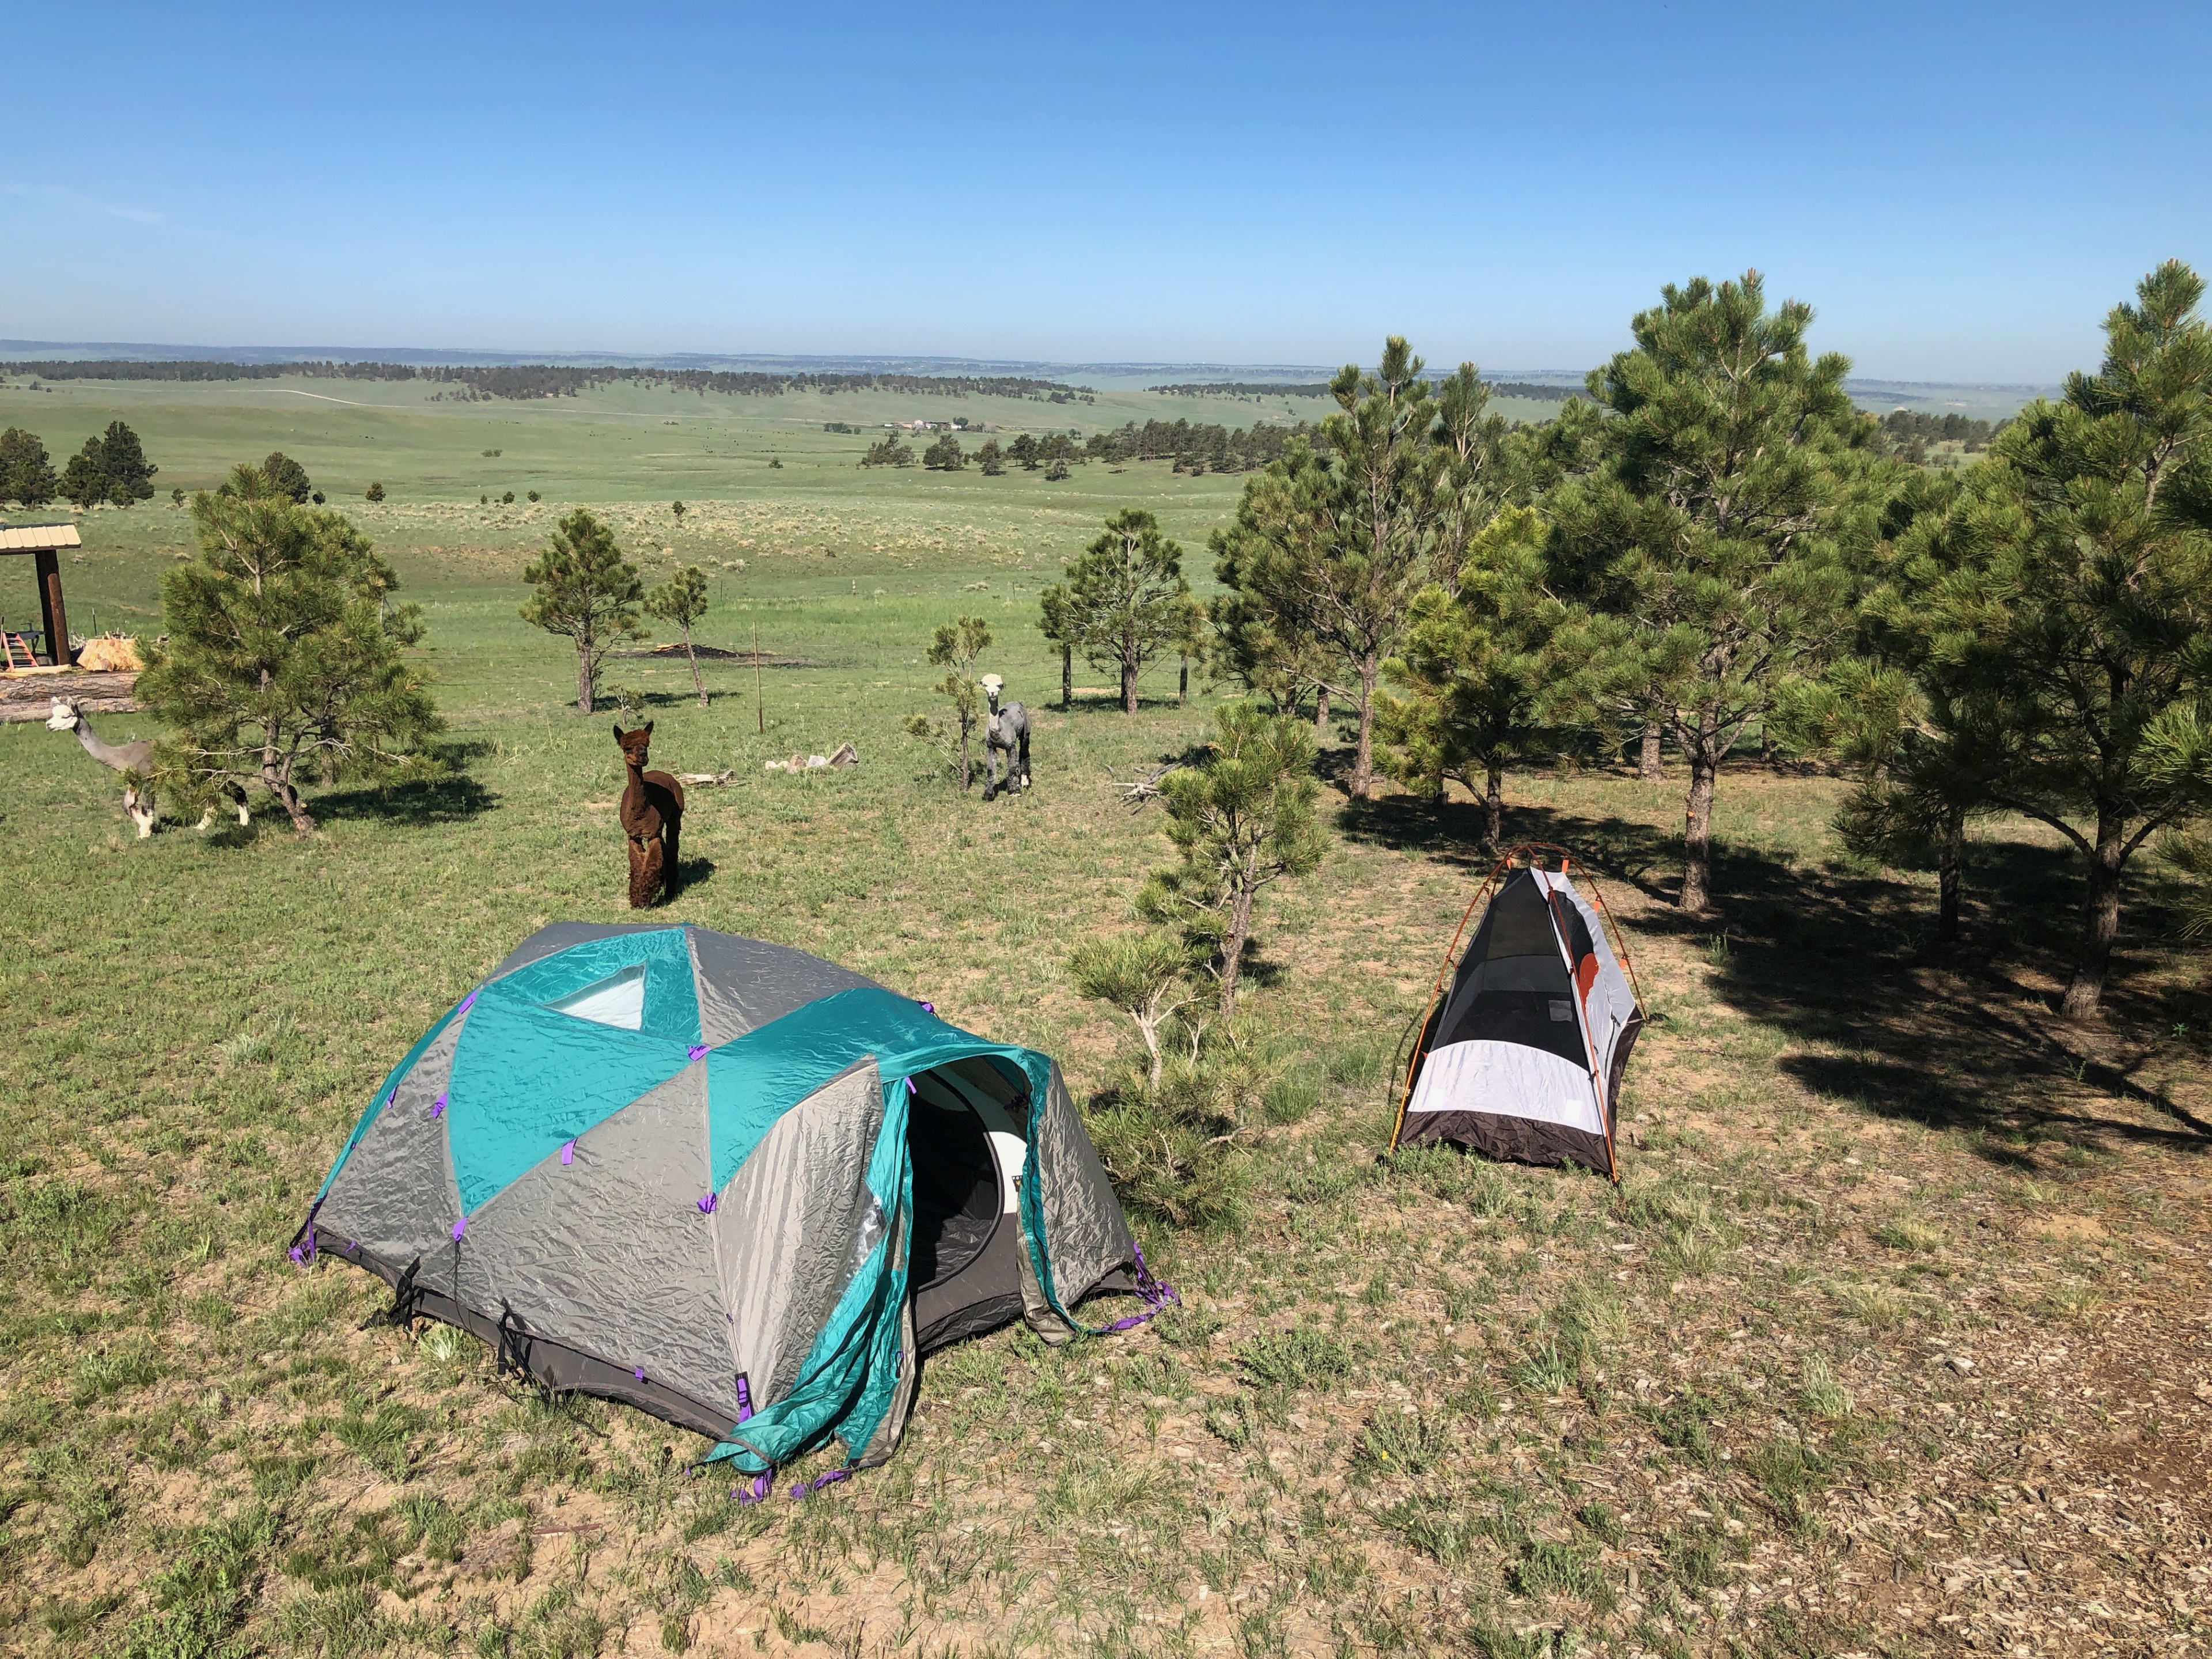 We have a number of different places you can set up your tents in this young forest with beautiful views!